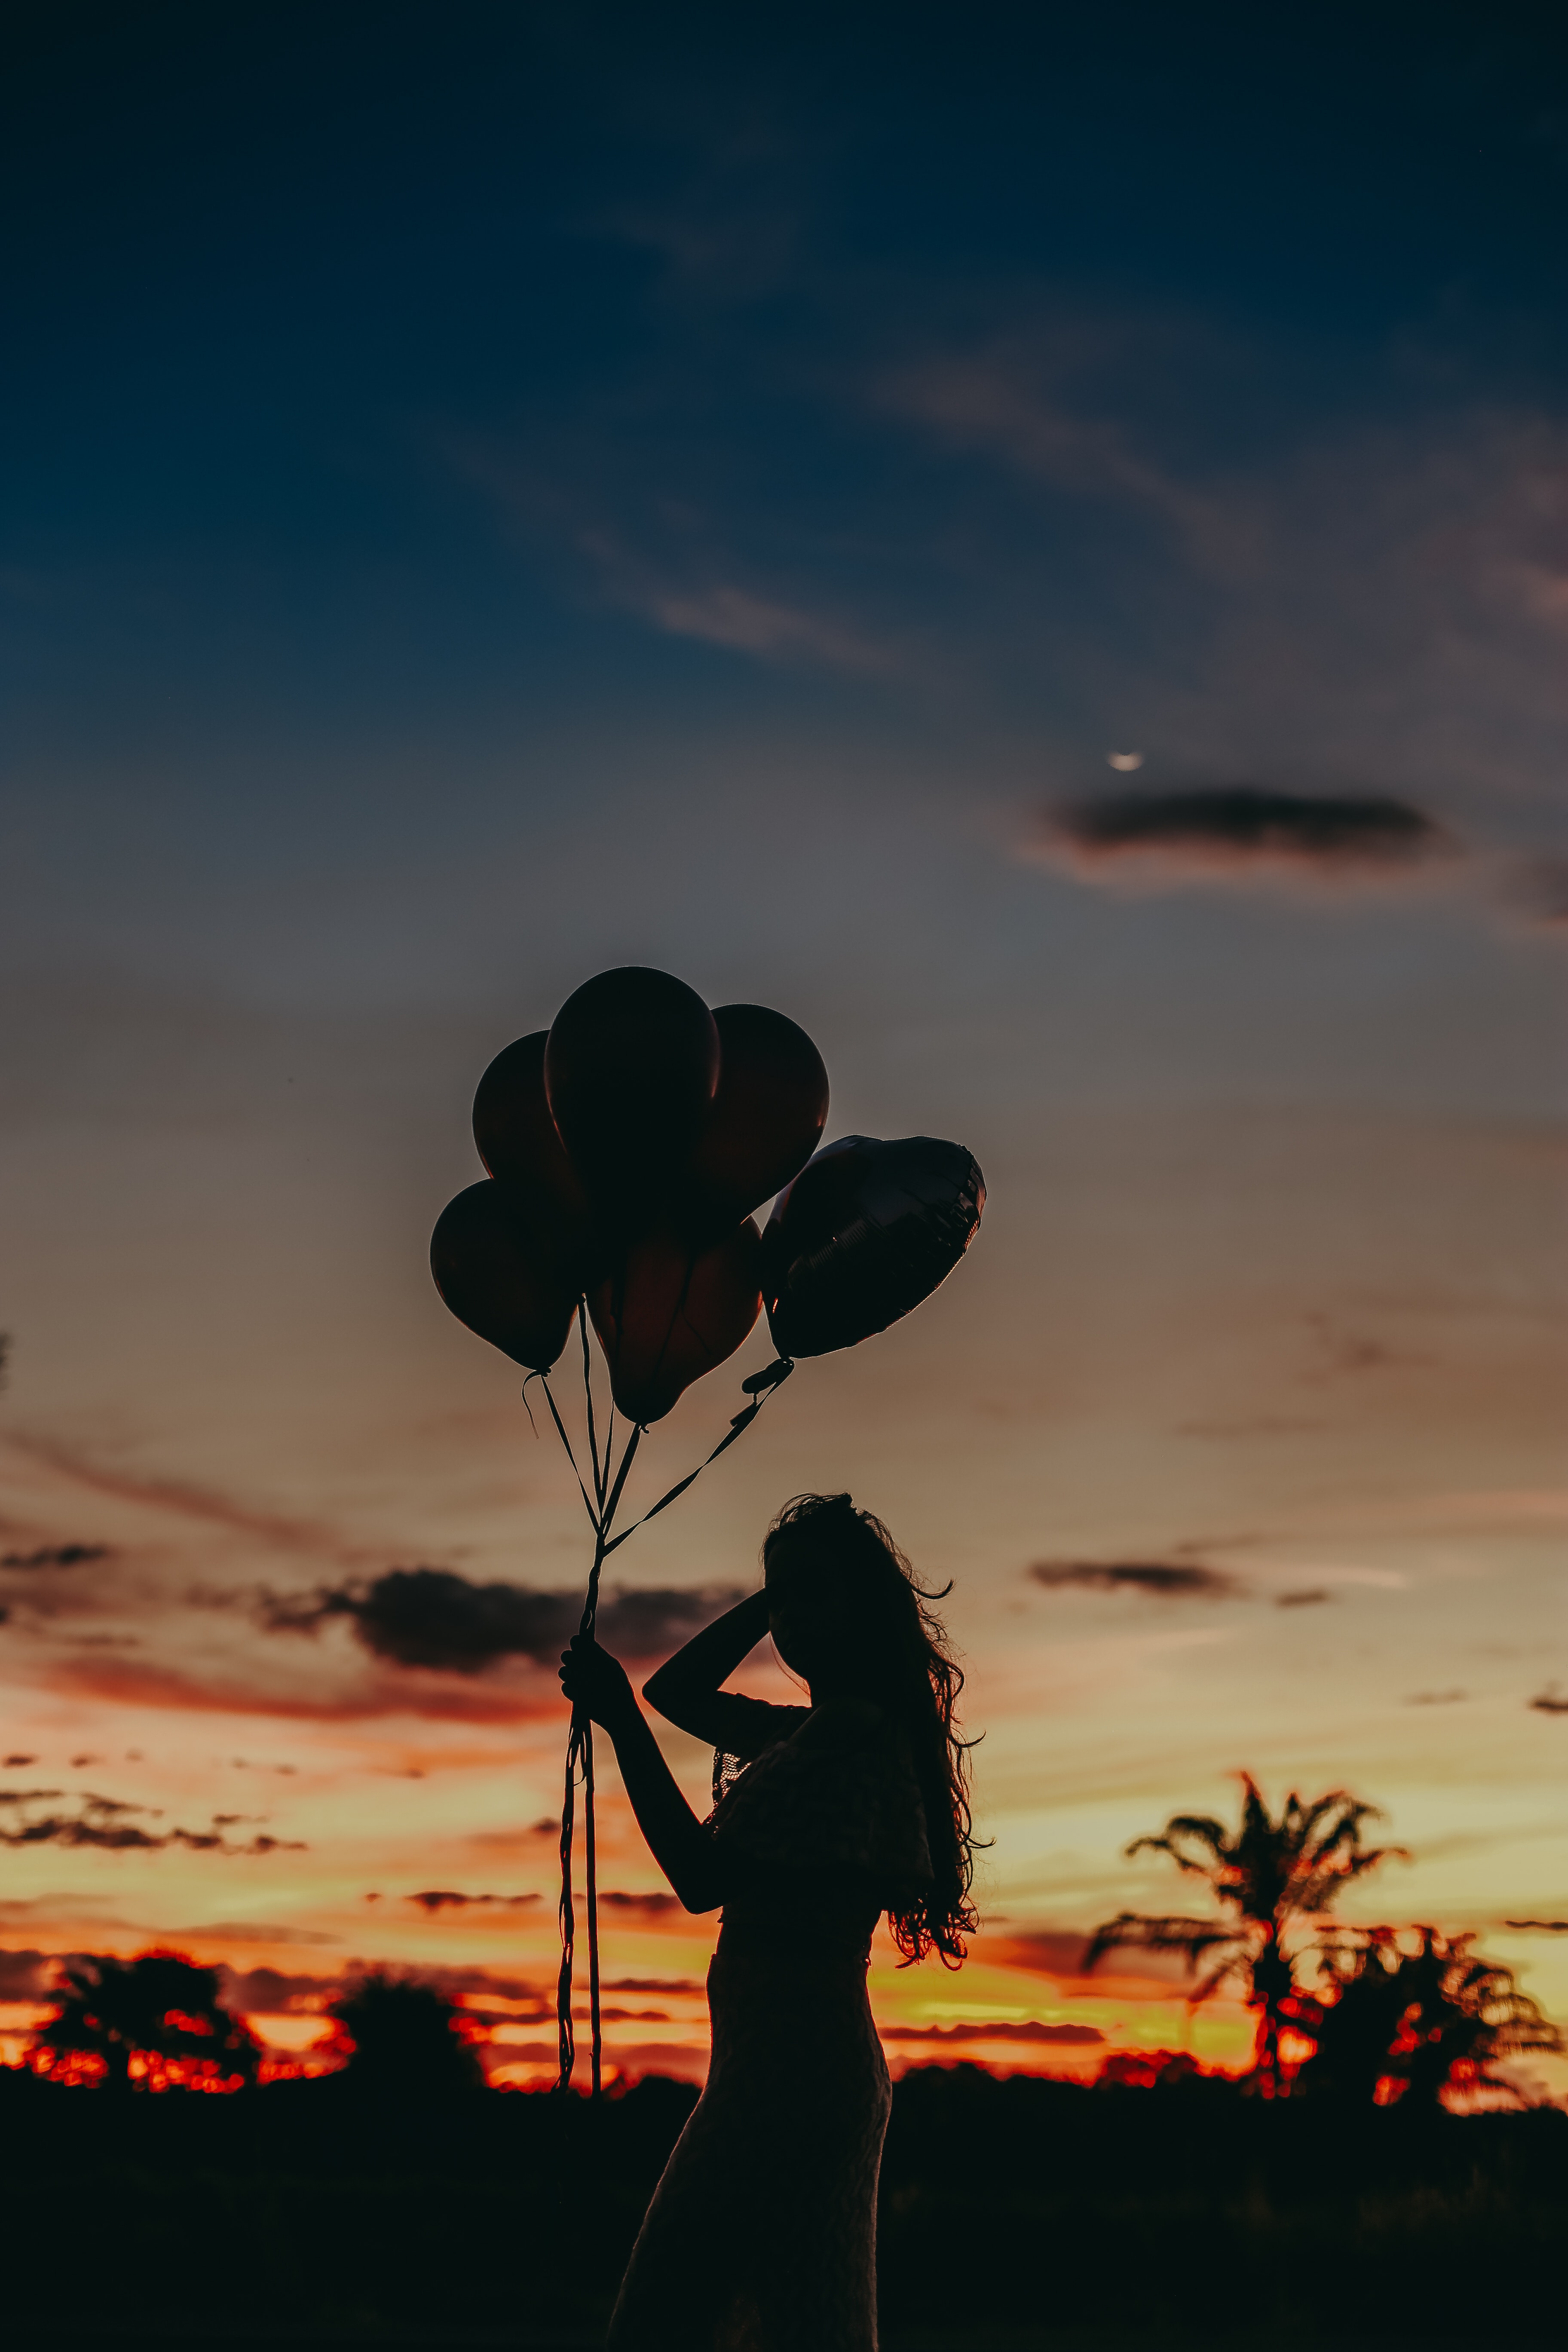 Silhouette of Woman Holding Balloons during Sunset · Free